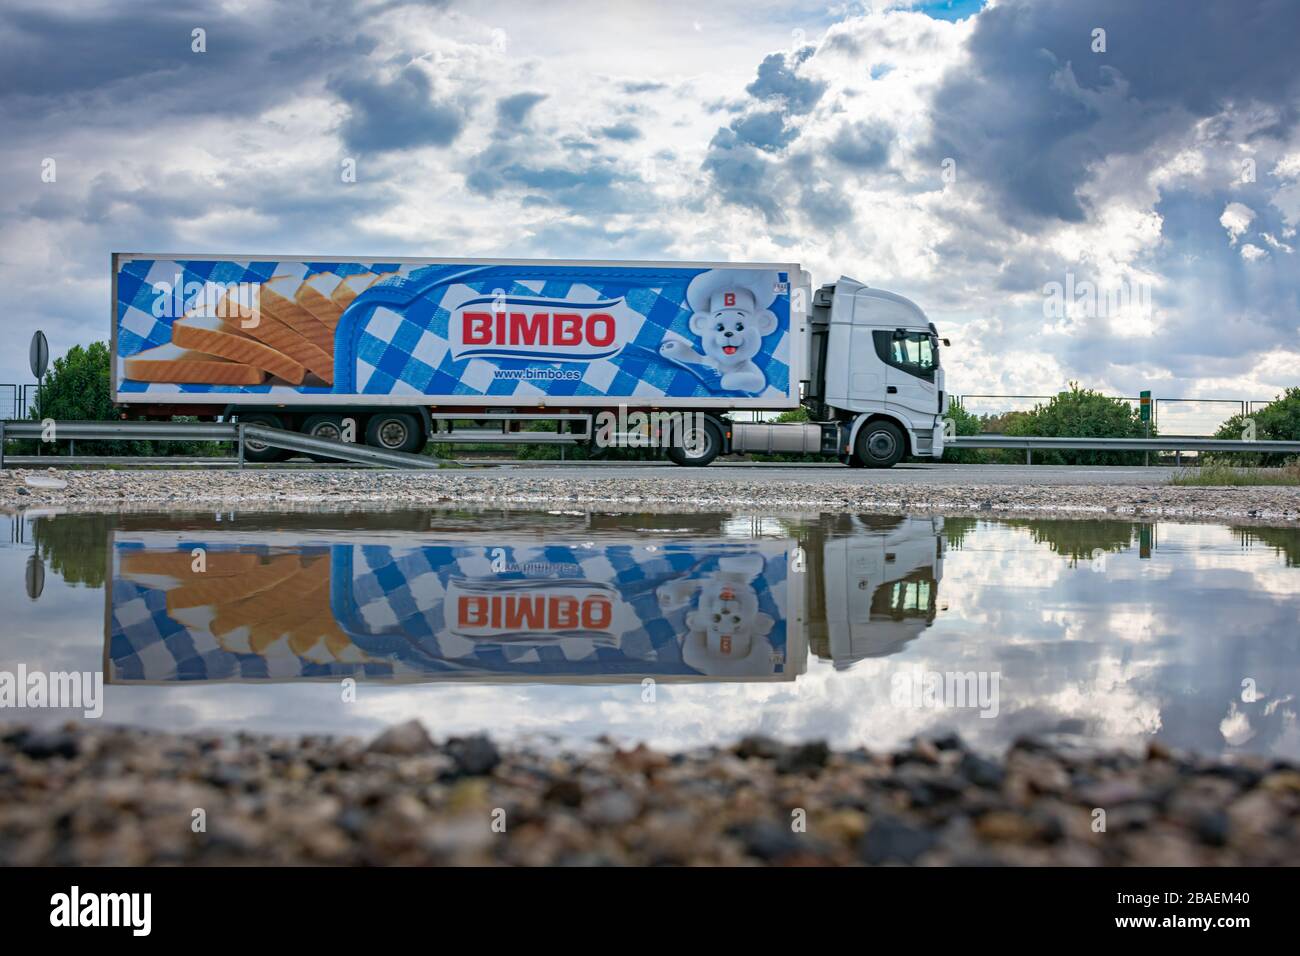 Truck with refrigerated semi-trailer transporting fresh products from the Bimbo brand Stock Photo